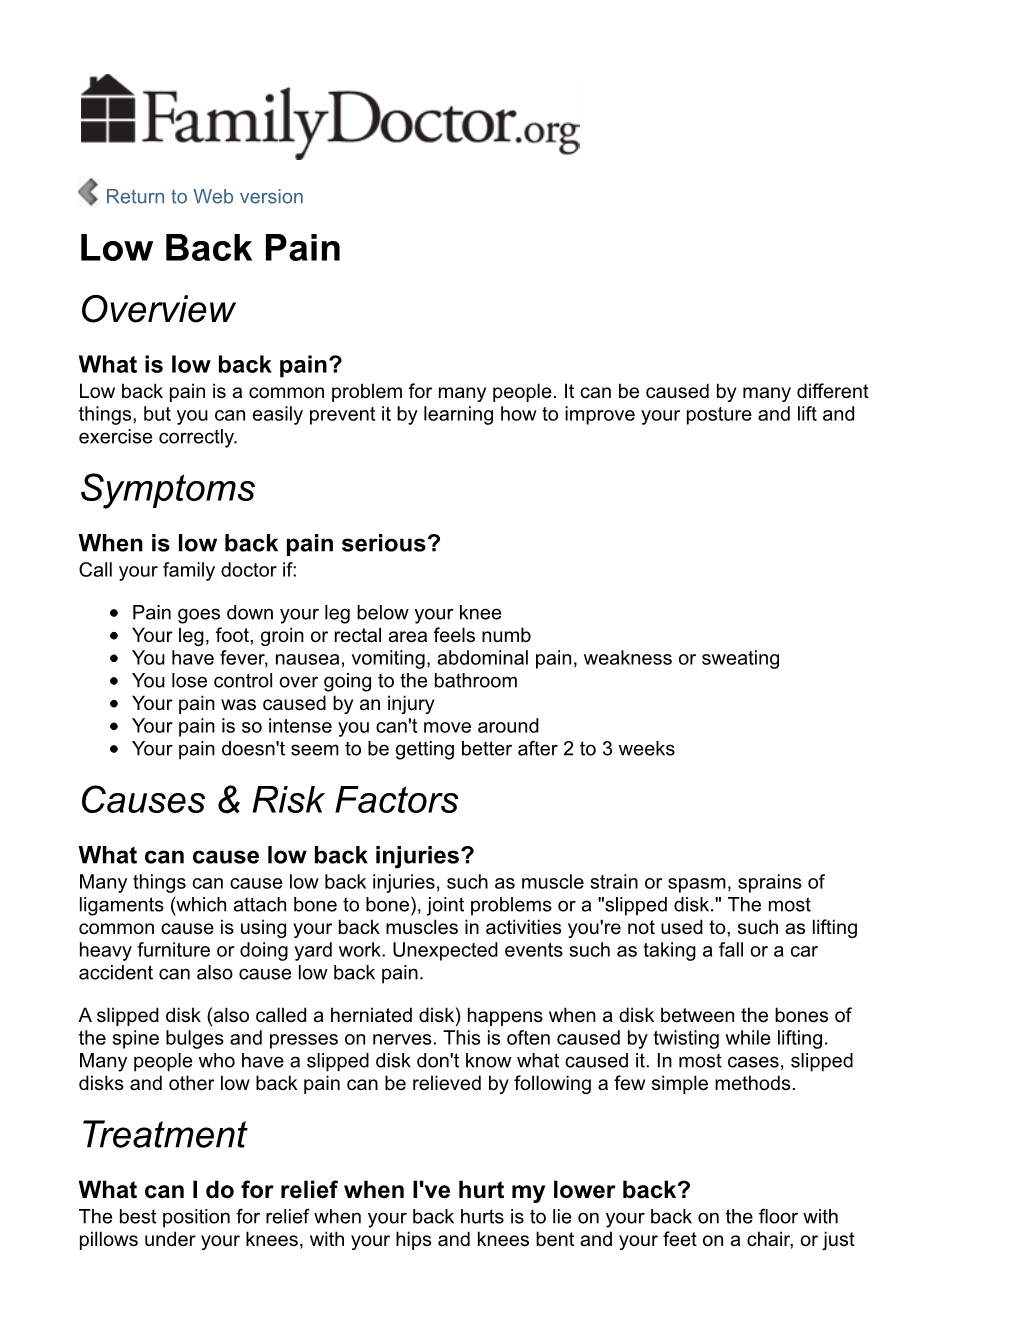 Low Back Pain | Overview